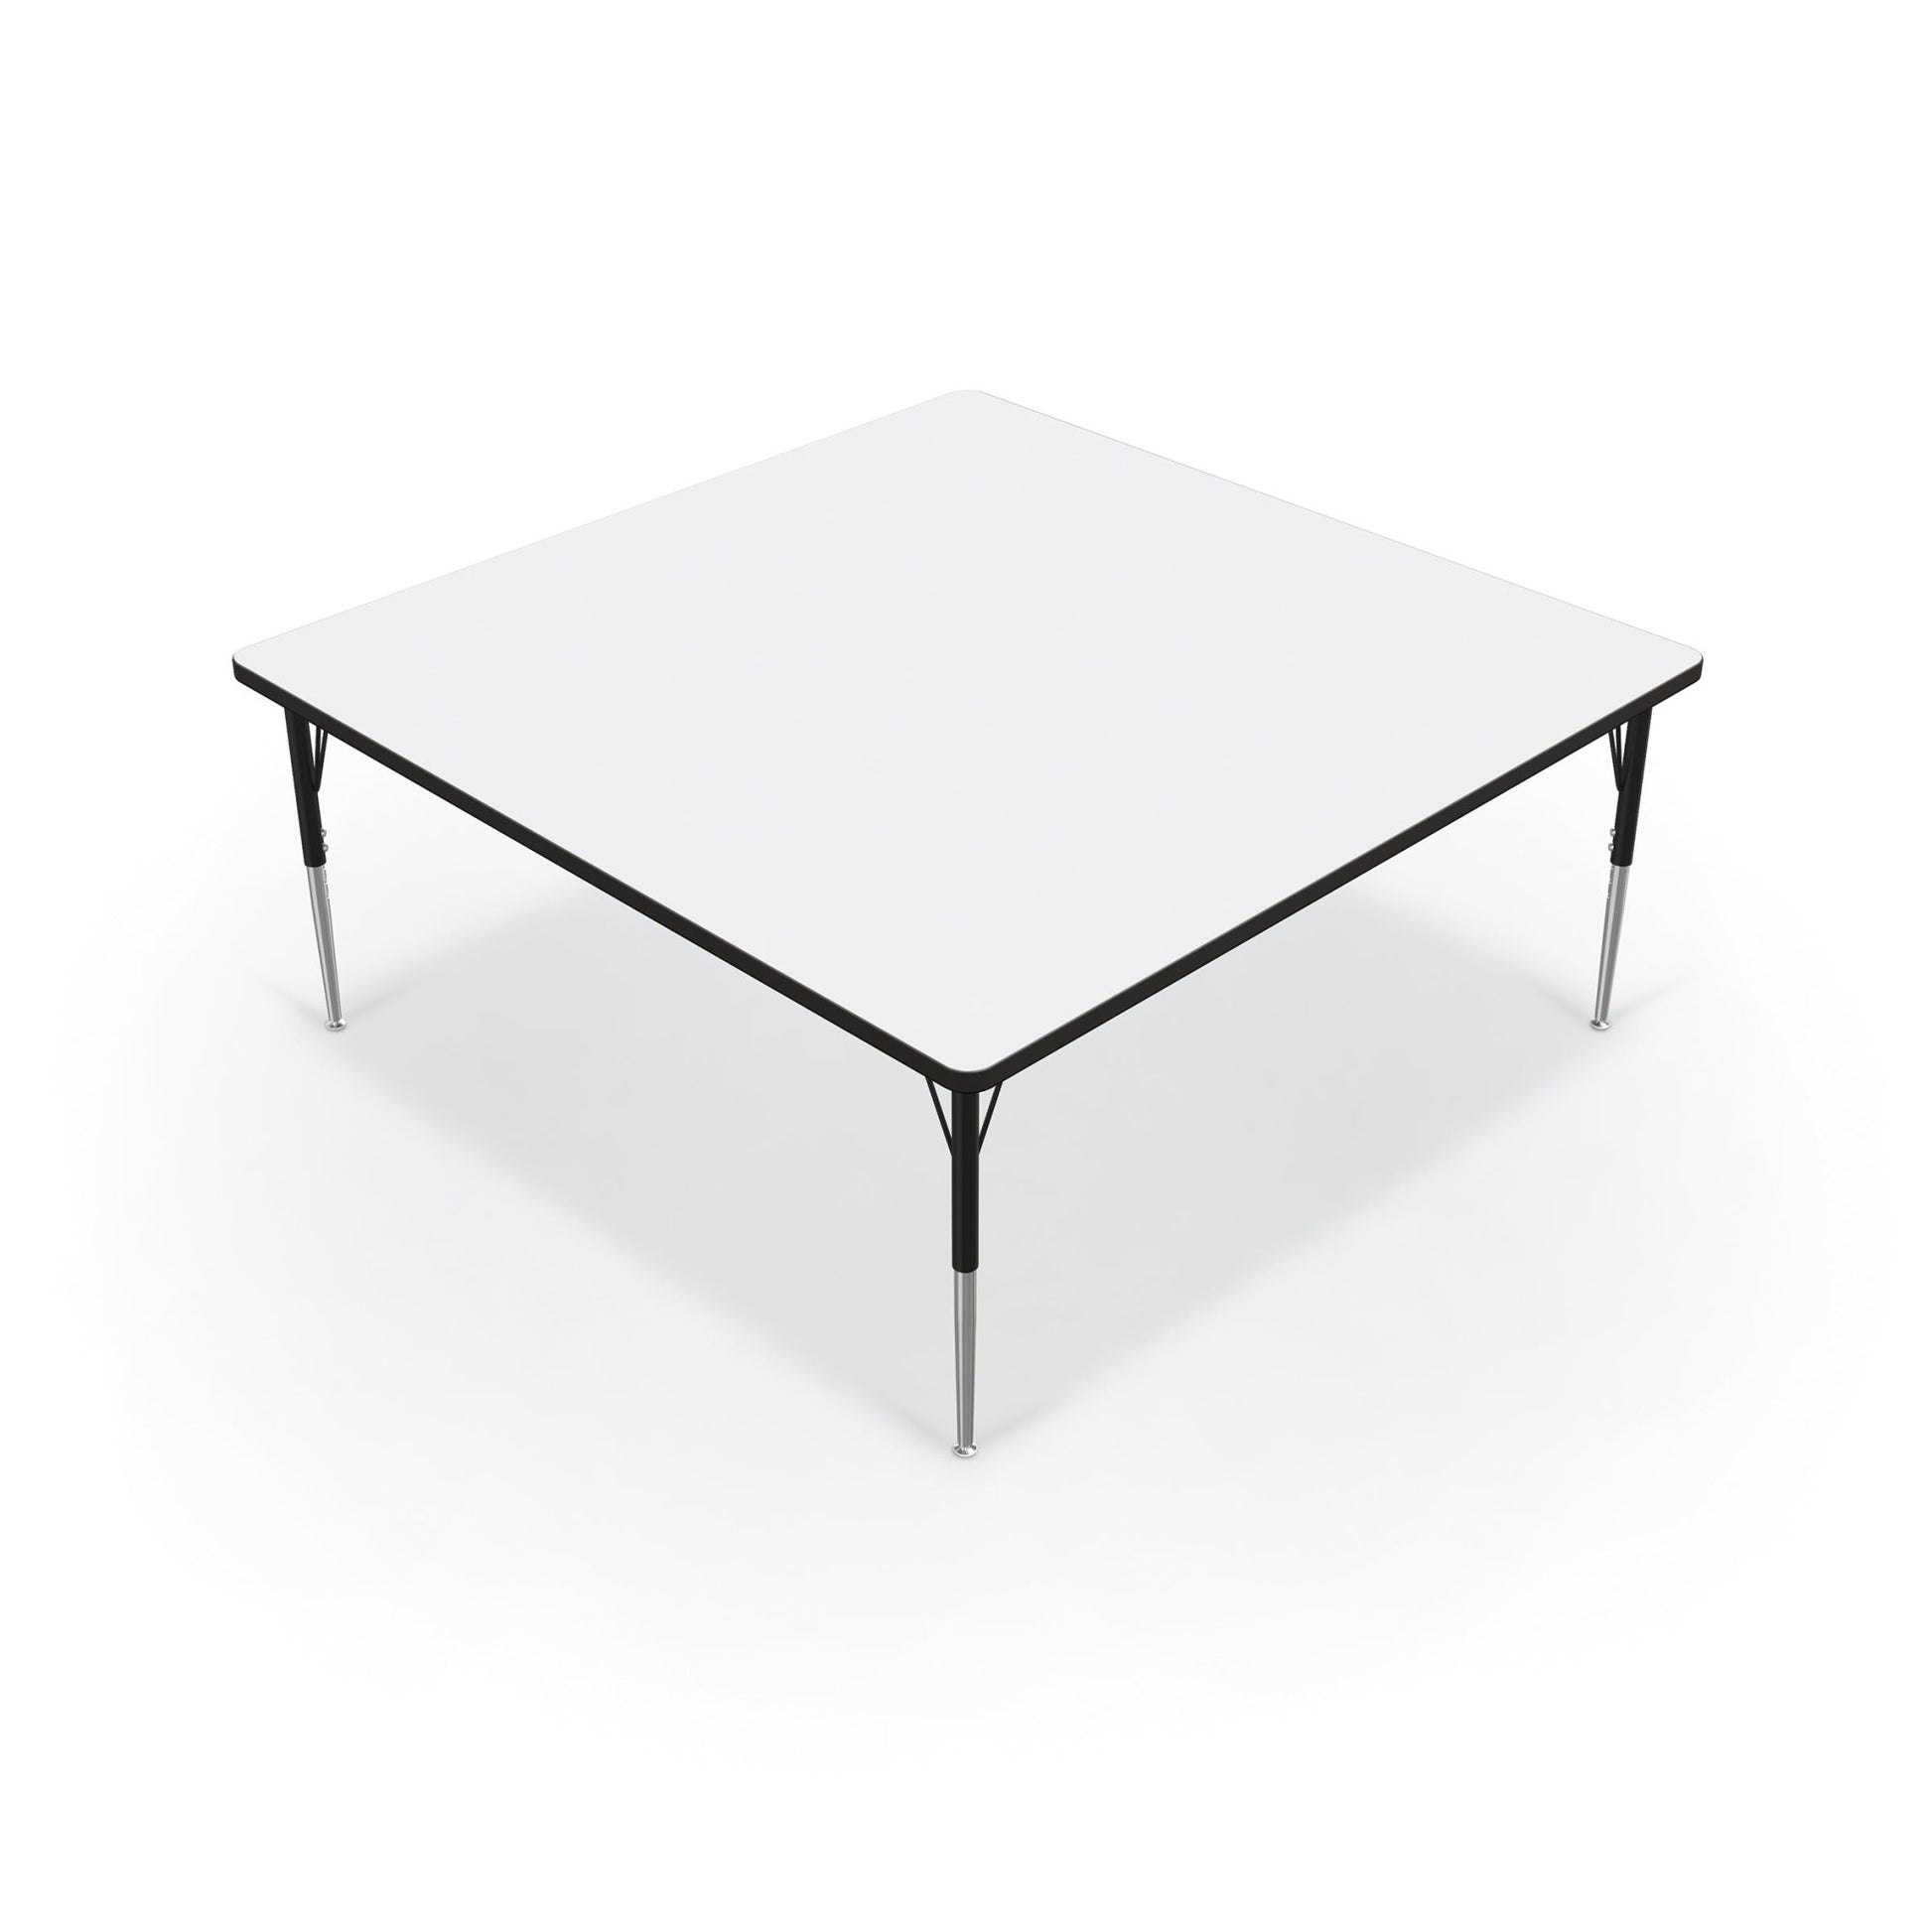 Mooreco Activity Table - 60"D x 60"W - Square - Black Edgeband (Mooreco 90527-M) - SchoolOutlet